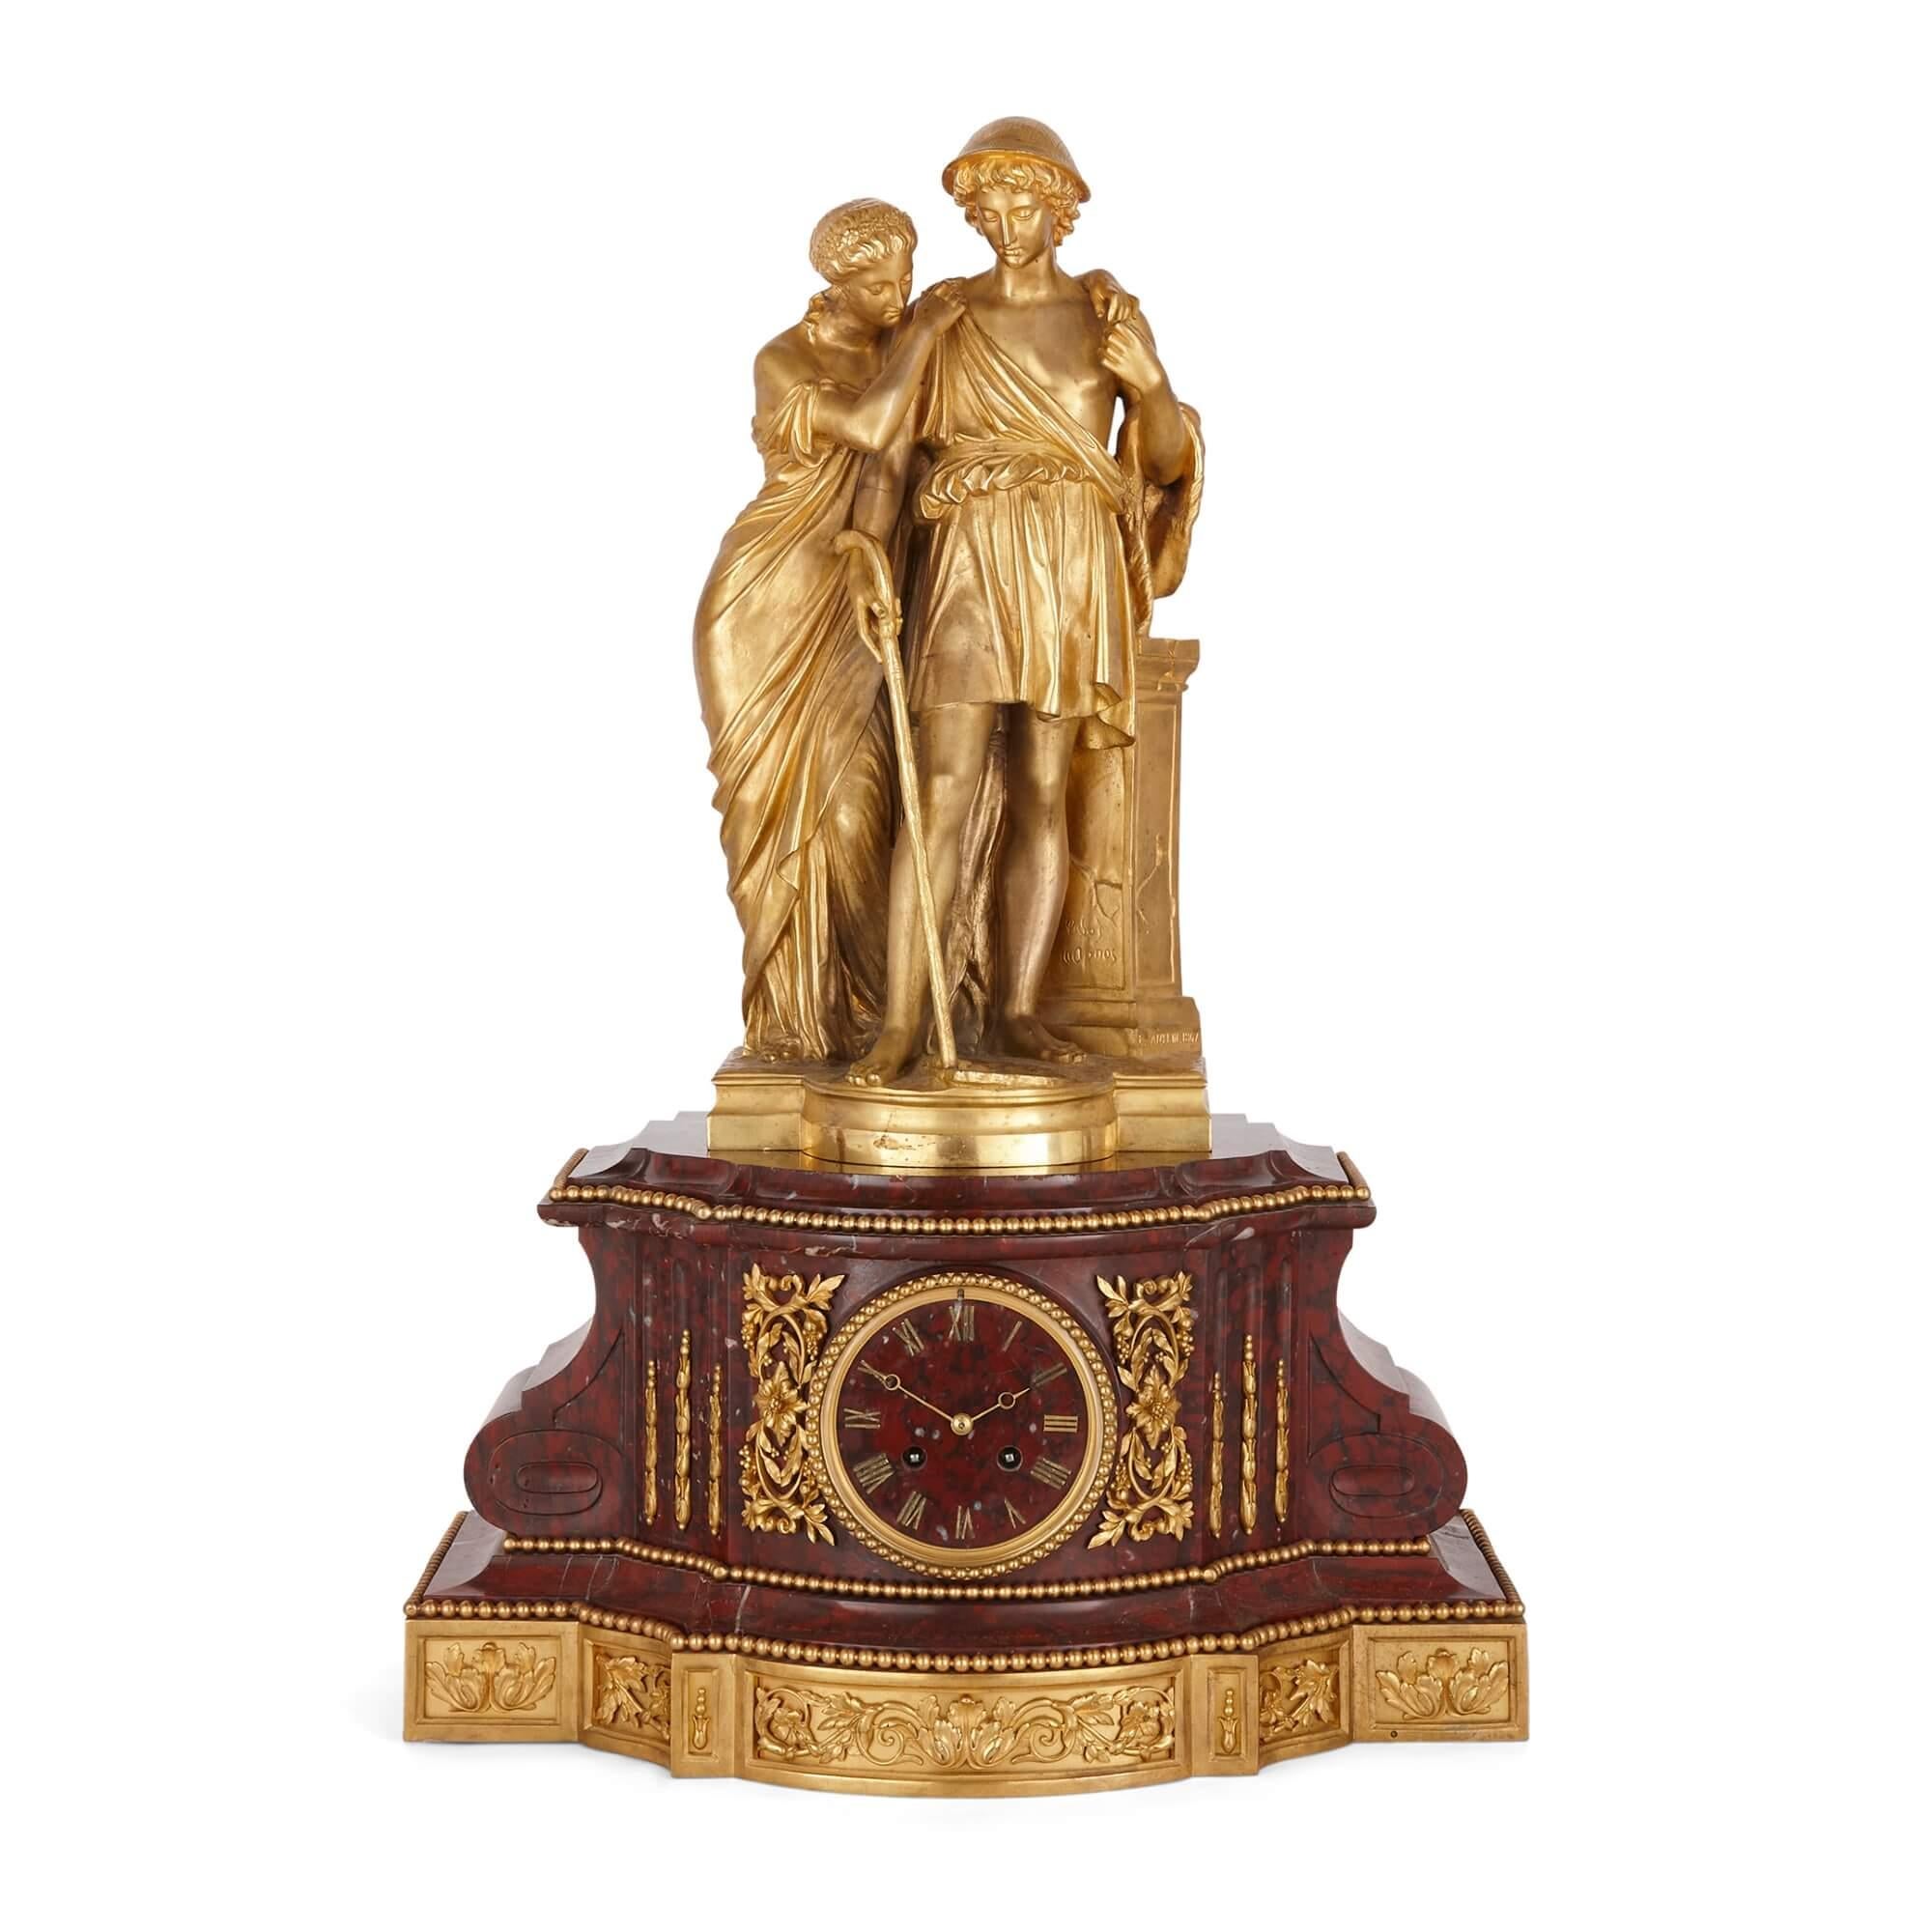 Louis XVI style ormolu and rouge griotte marble clock set
French, 1867
Clock: height 67cm, width 46cm, depth 28cm
Candelabra: height 81cm, width 34cm, depth 34cm

Comprising a pair of six-light vase candelabra flanking a clock-inset pedestal,